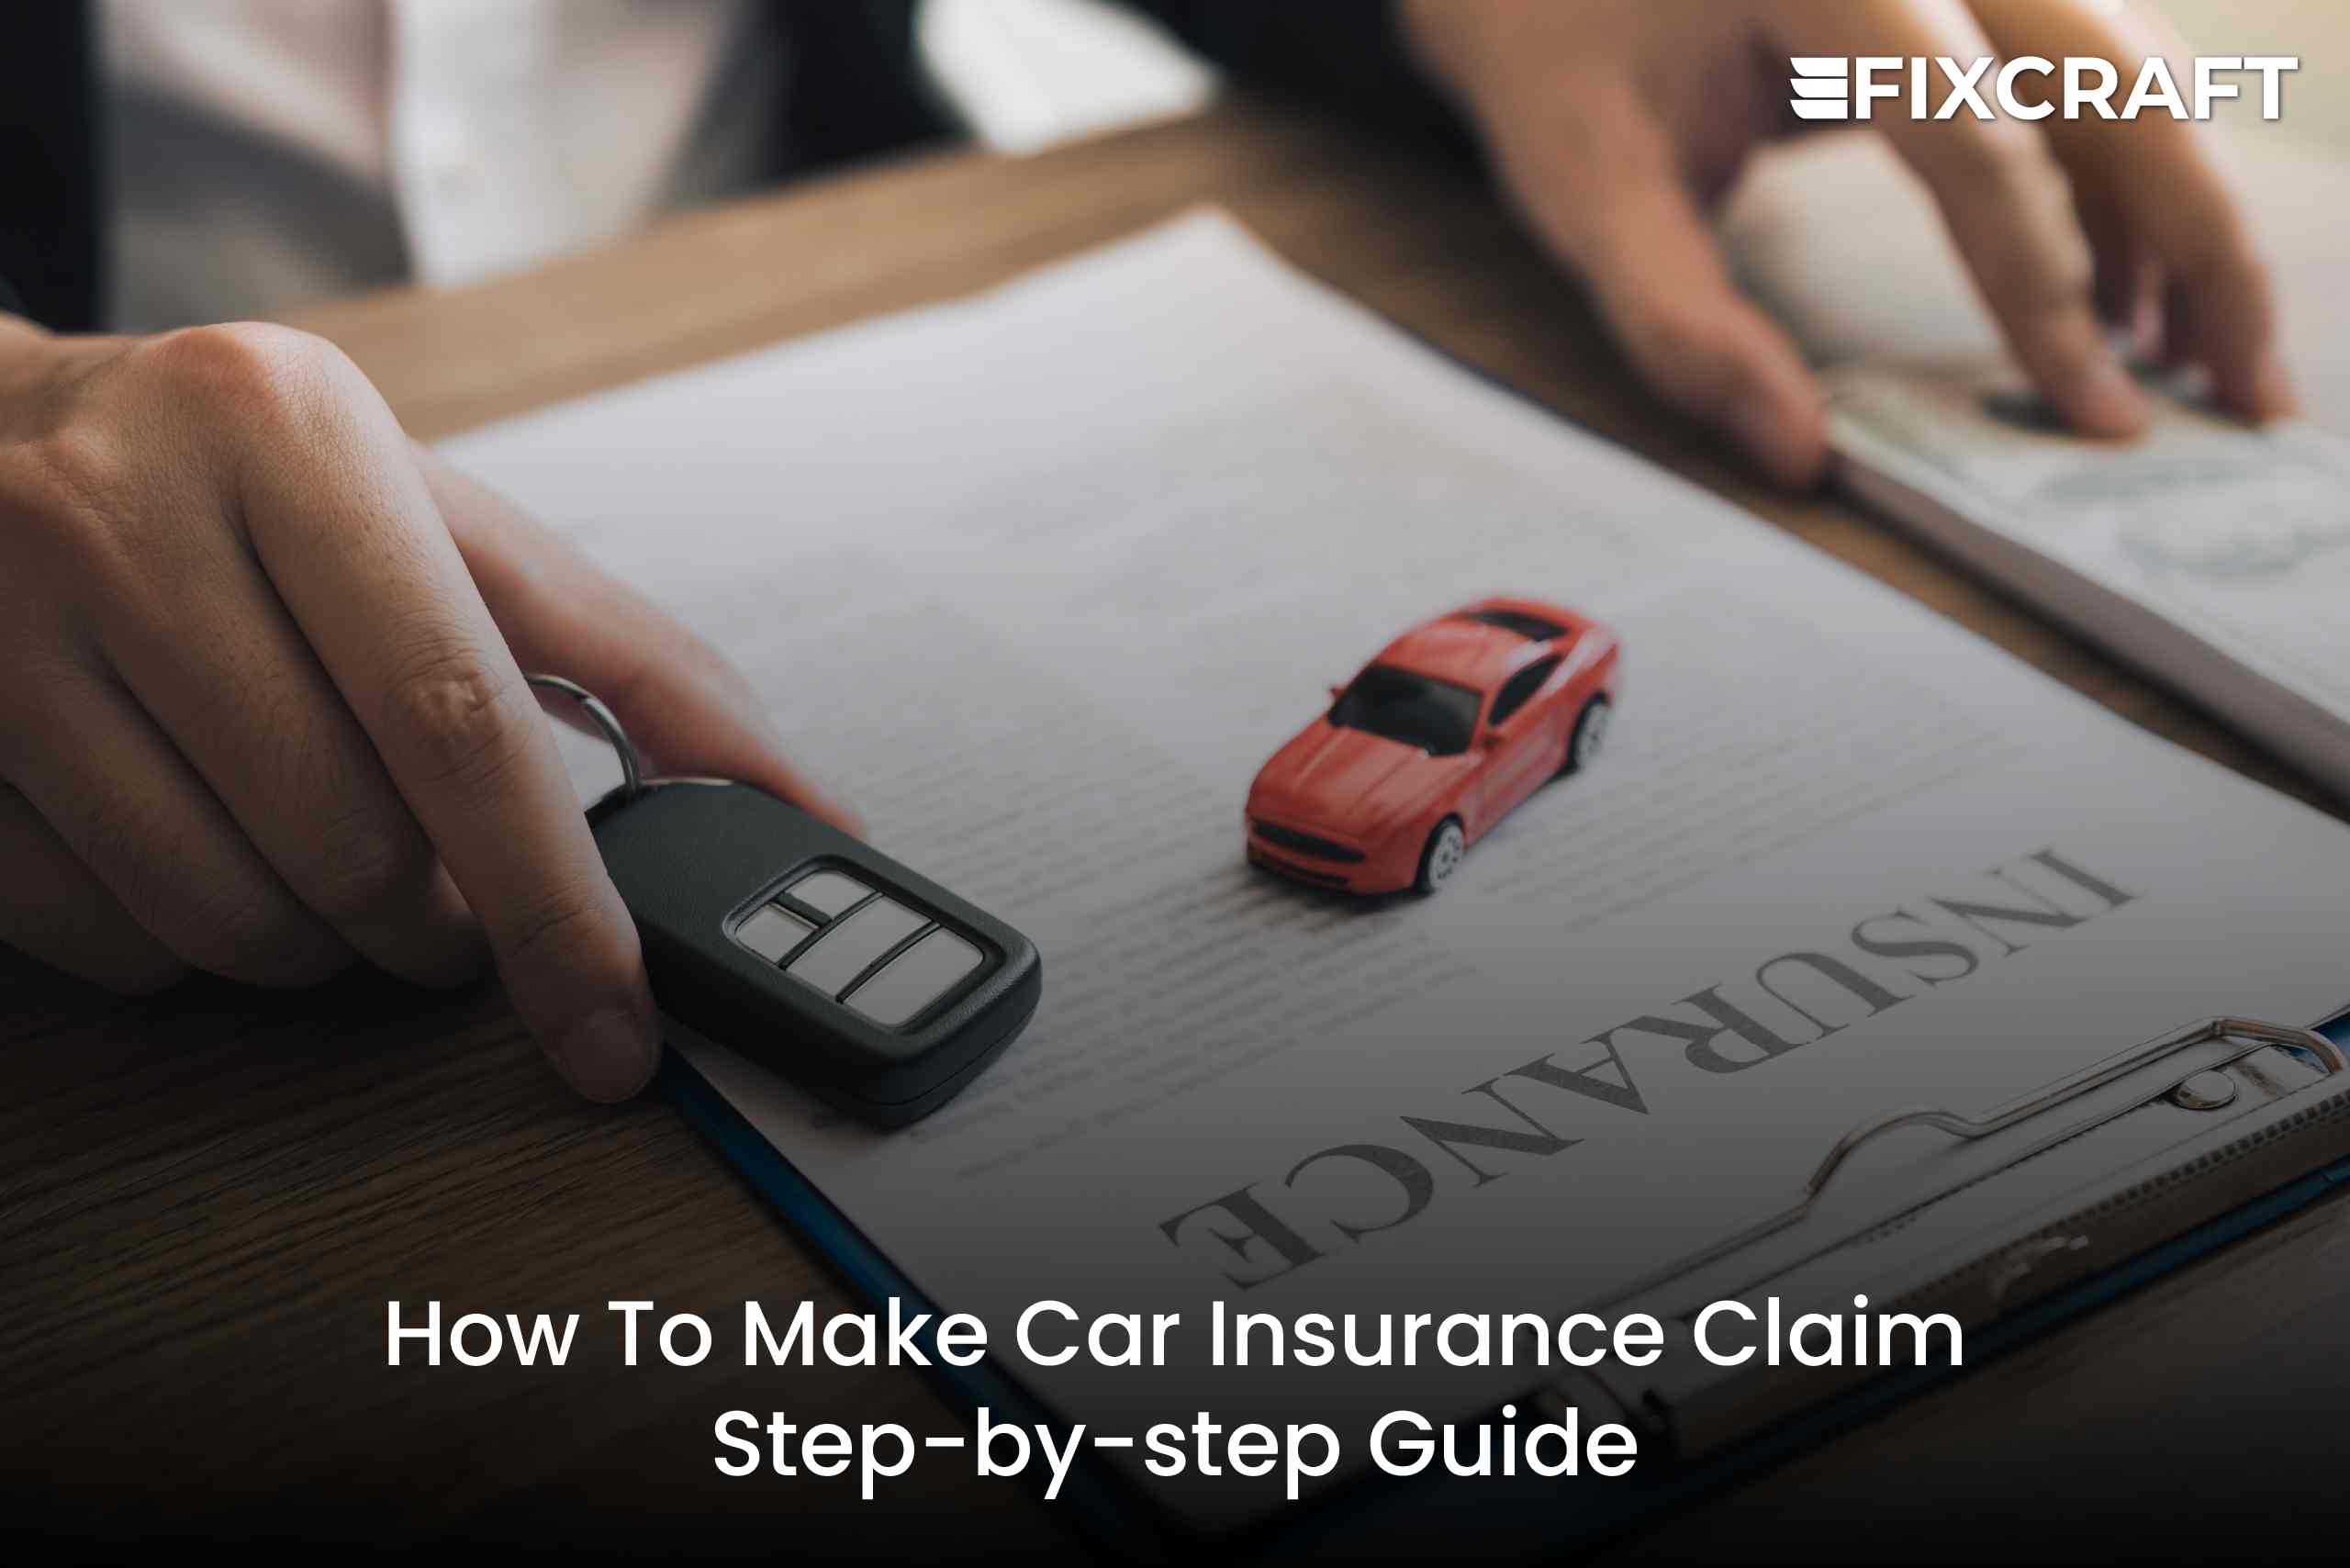 How to claim car insurance by Fixcraft